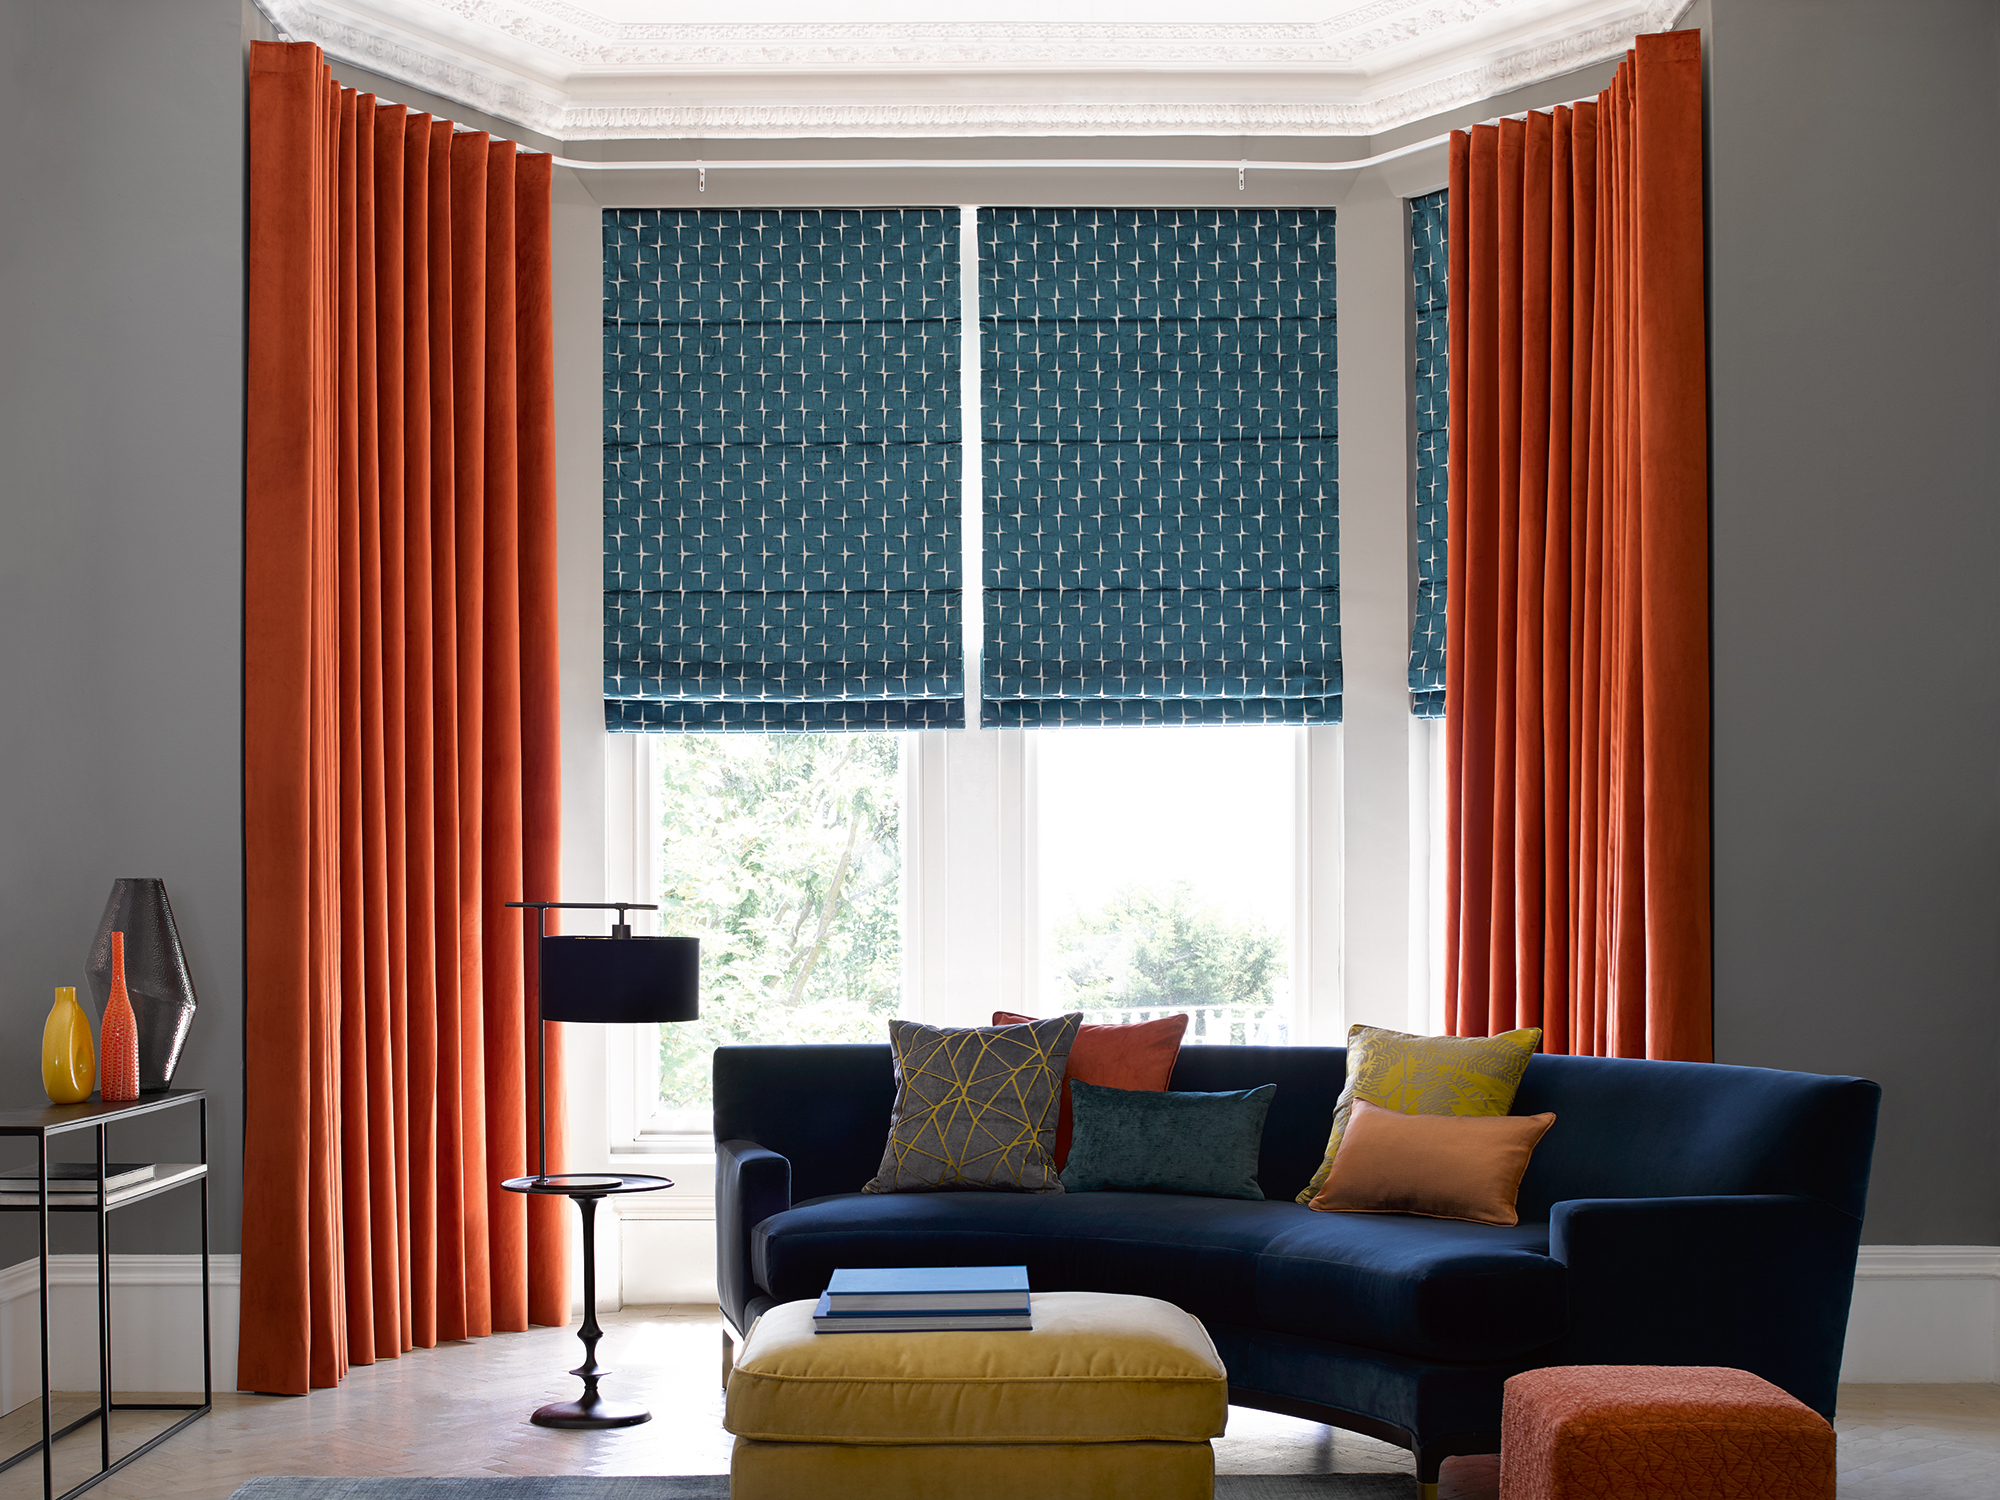 How to wash and care for curtains and drapes – the right way